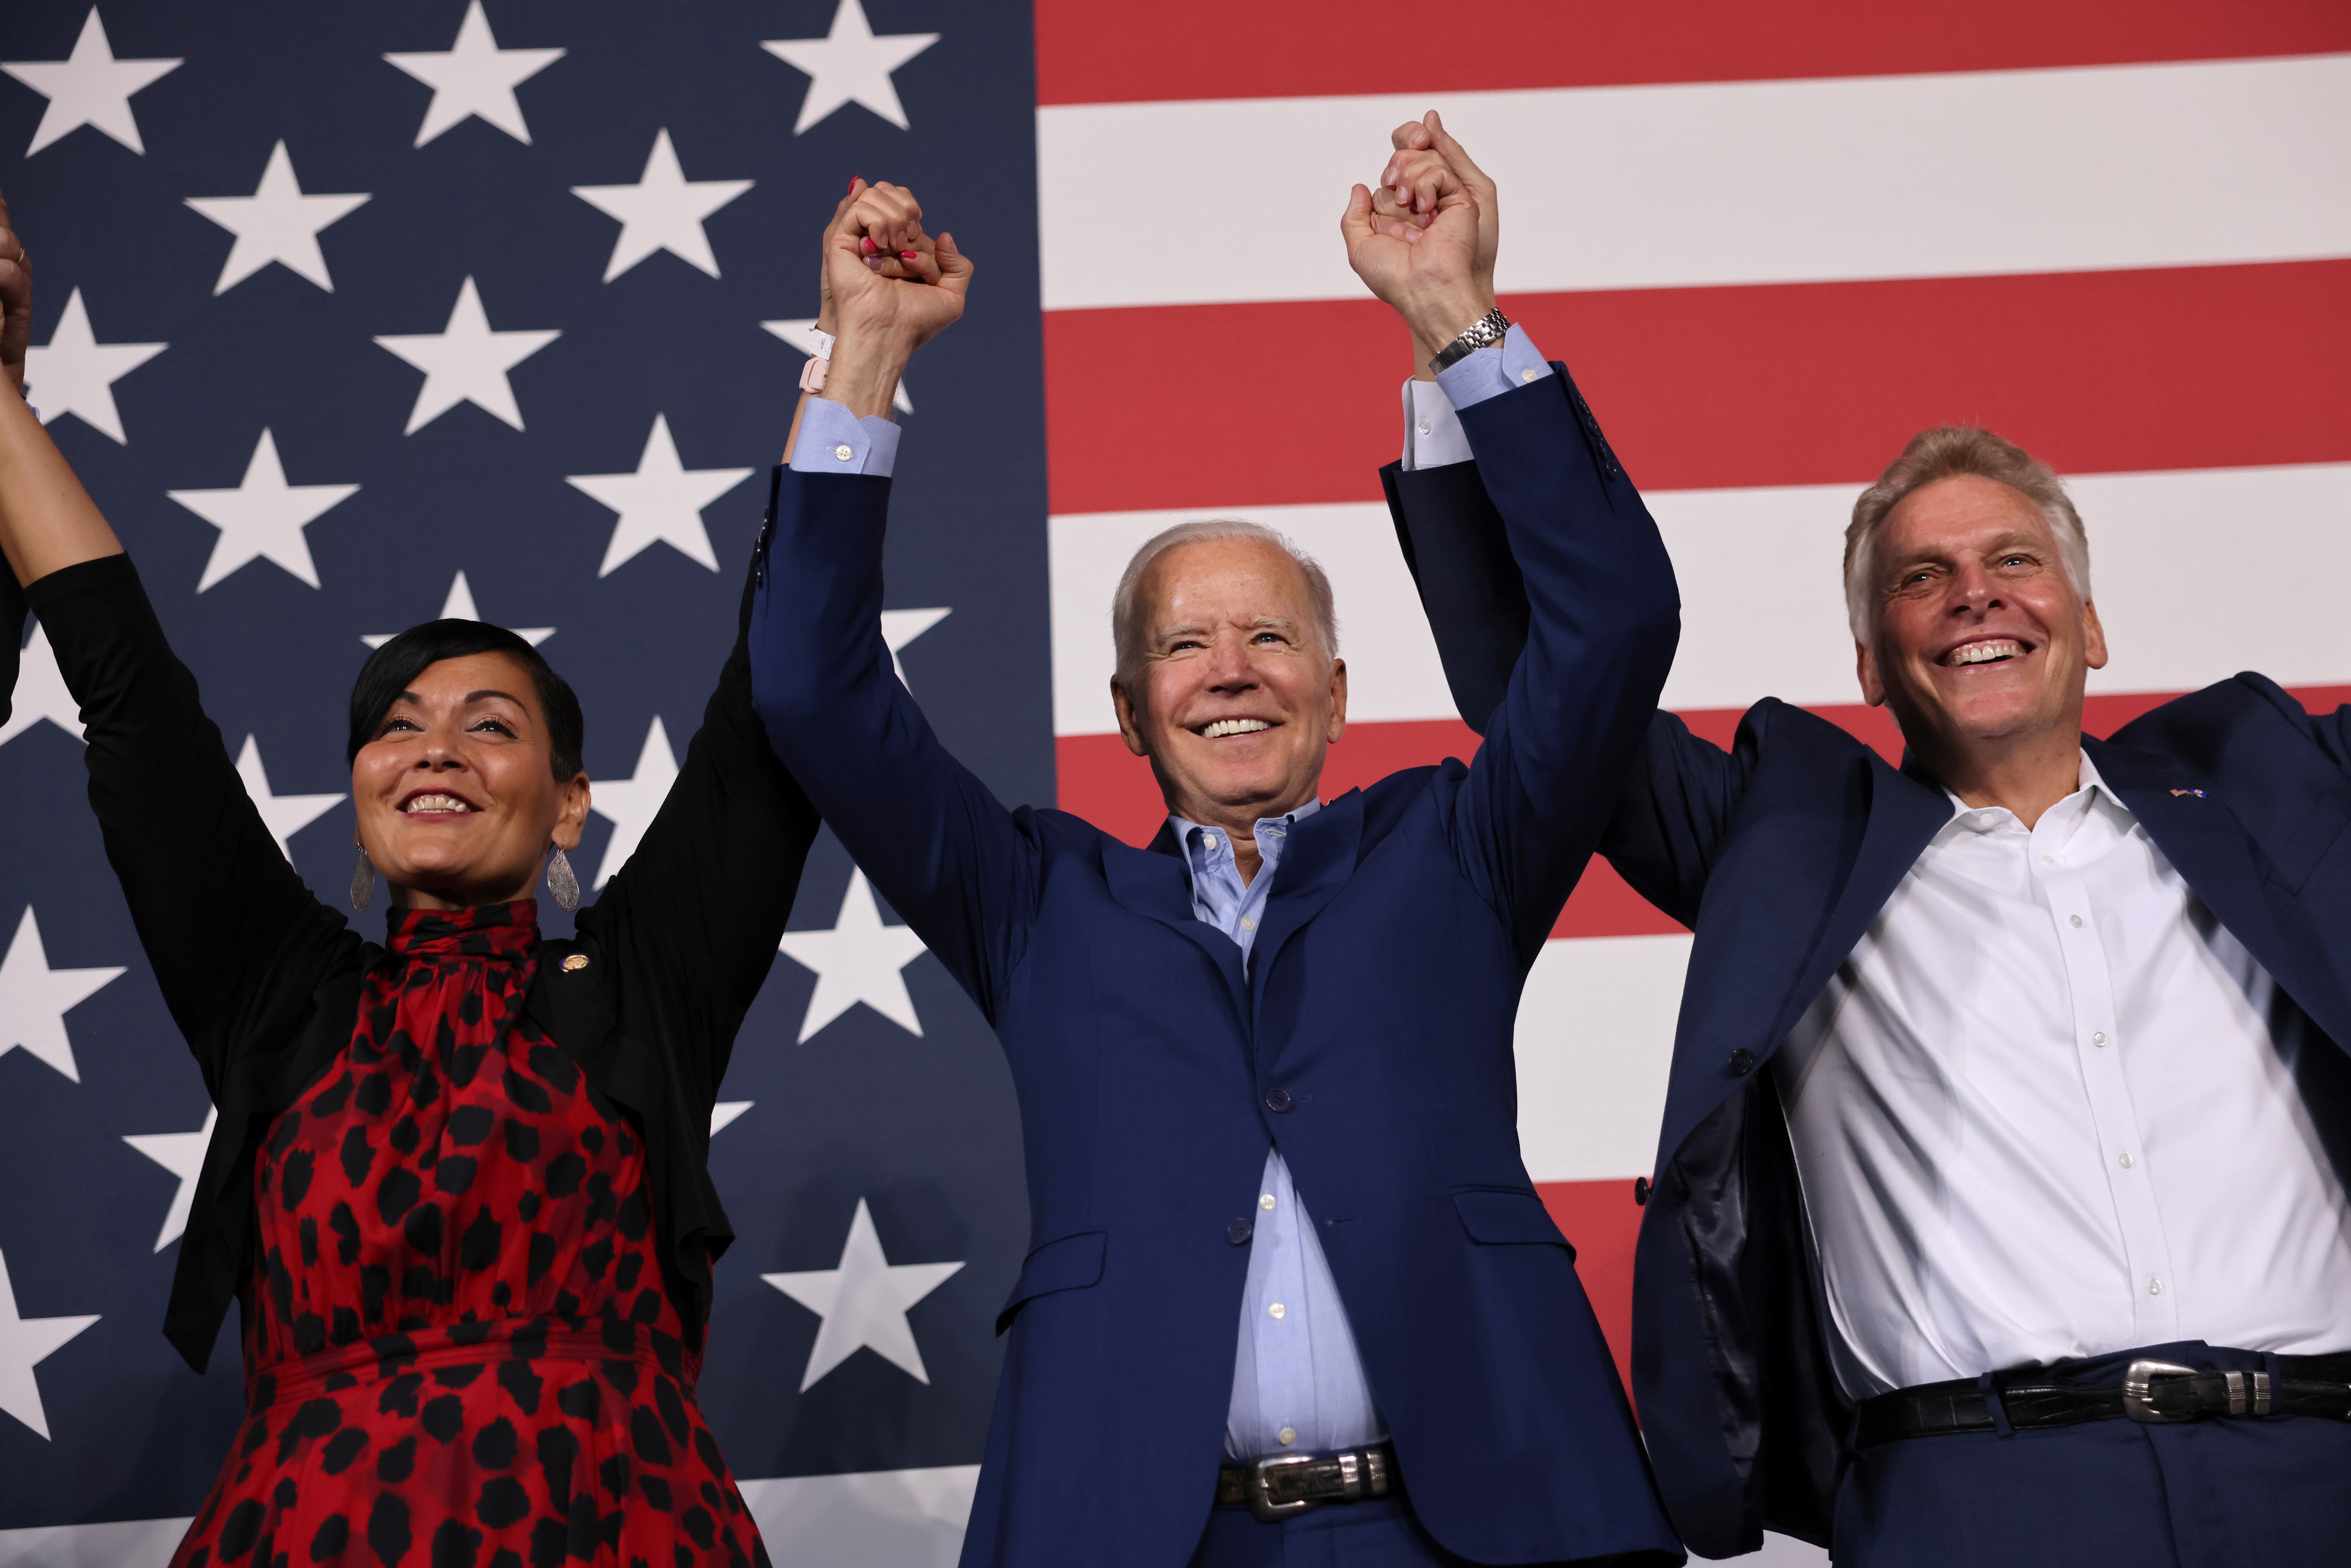 U.S. President Joe Biden participates in a campaign event with candidate for Lieutenant Governor of Virginia, Hala Ayala, and candidate for Governor Terry McAuliffe, at Lubber Run Park in Arlington, Virginia, U.S., July 23, 2021. REUTERS/Evelyn Hockstein